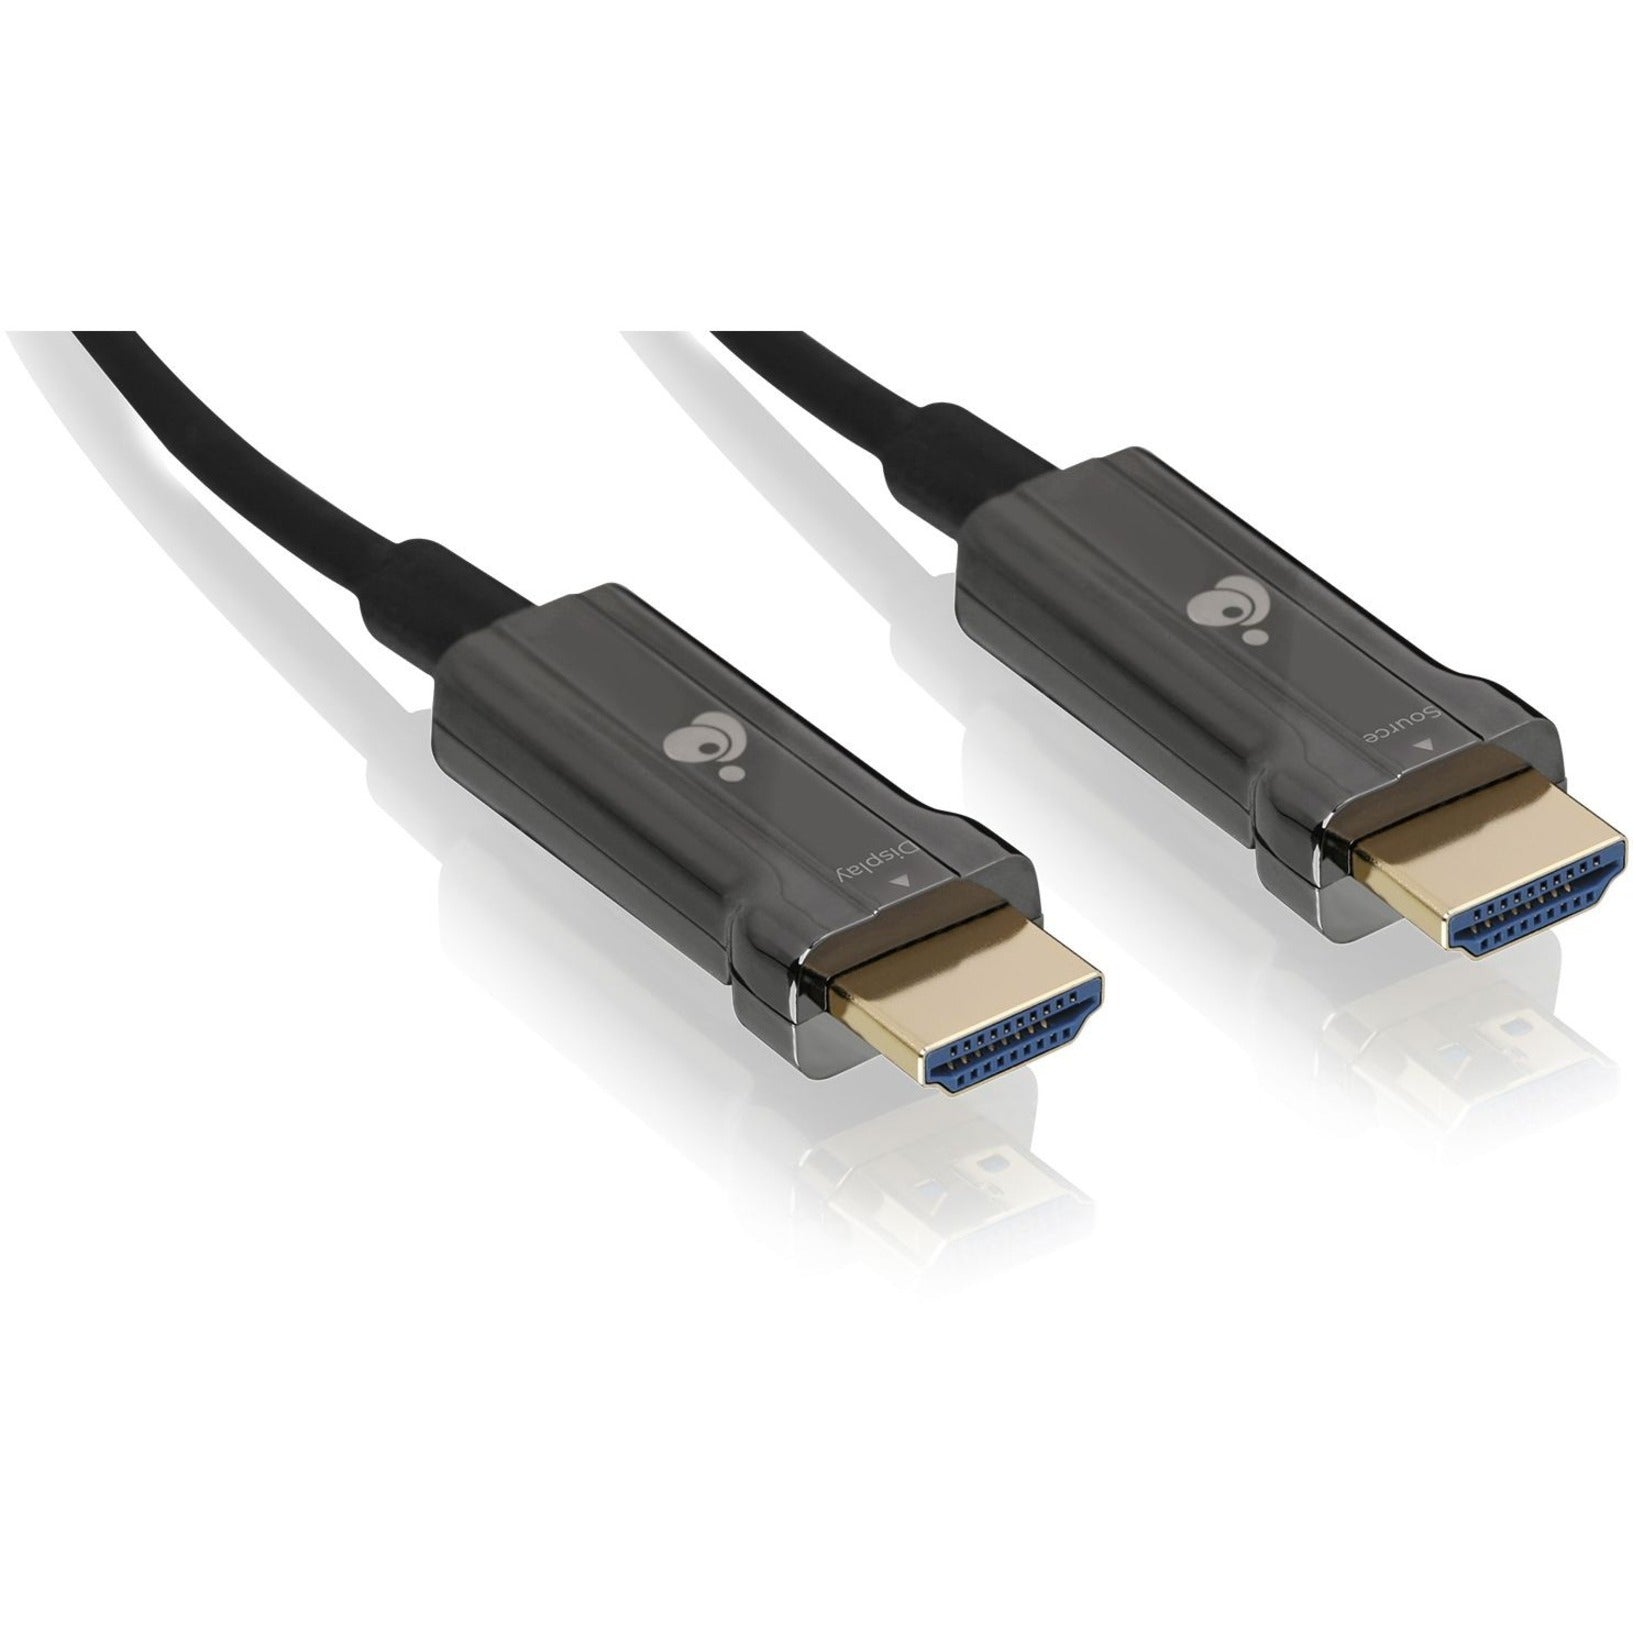 IOGEAR GHDAOC30 10K HDMI Active Optical Cable 100 ft., A/V Cable with Active Optical Technology (AOT), HDR Support, and More